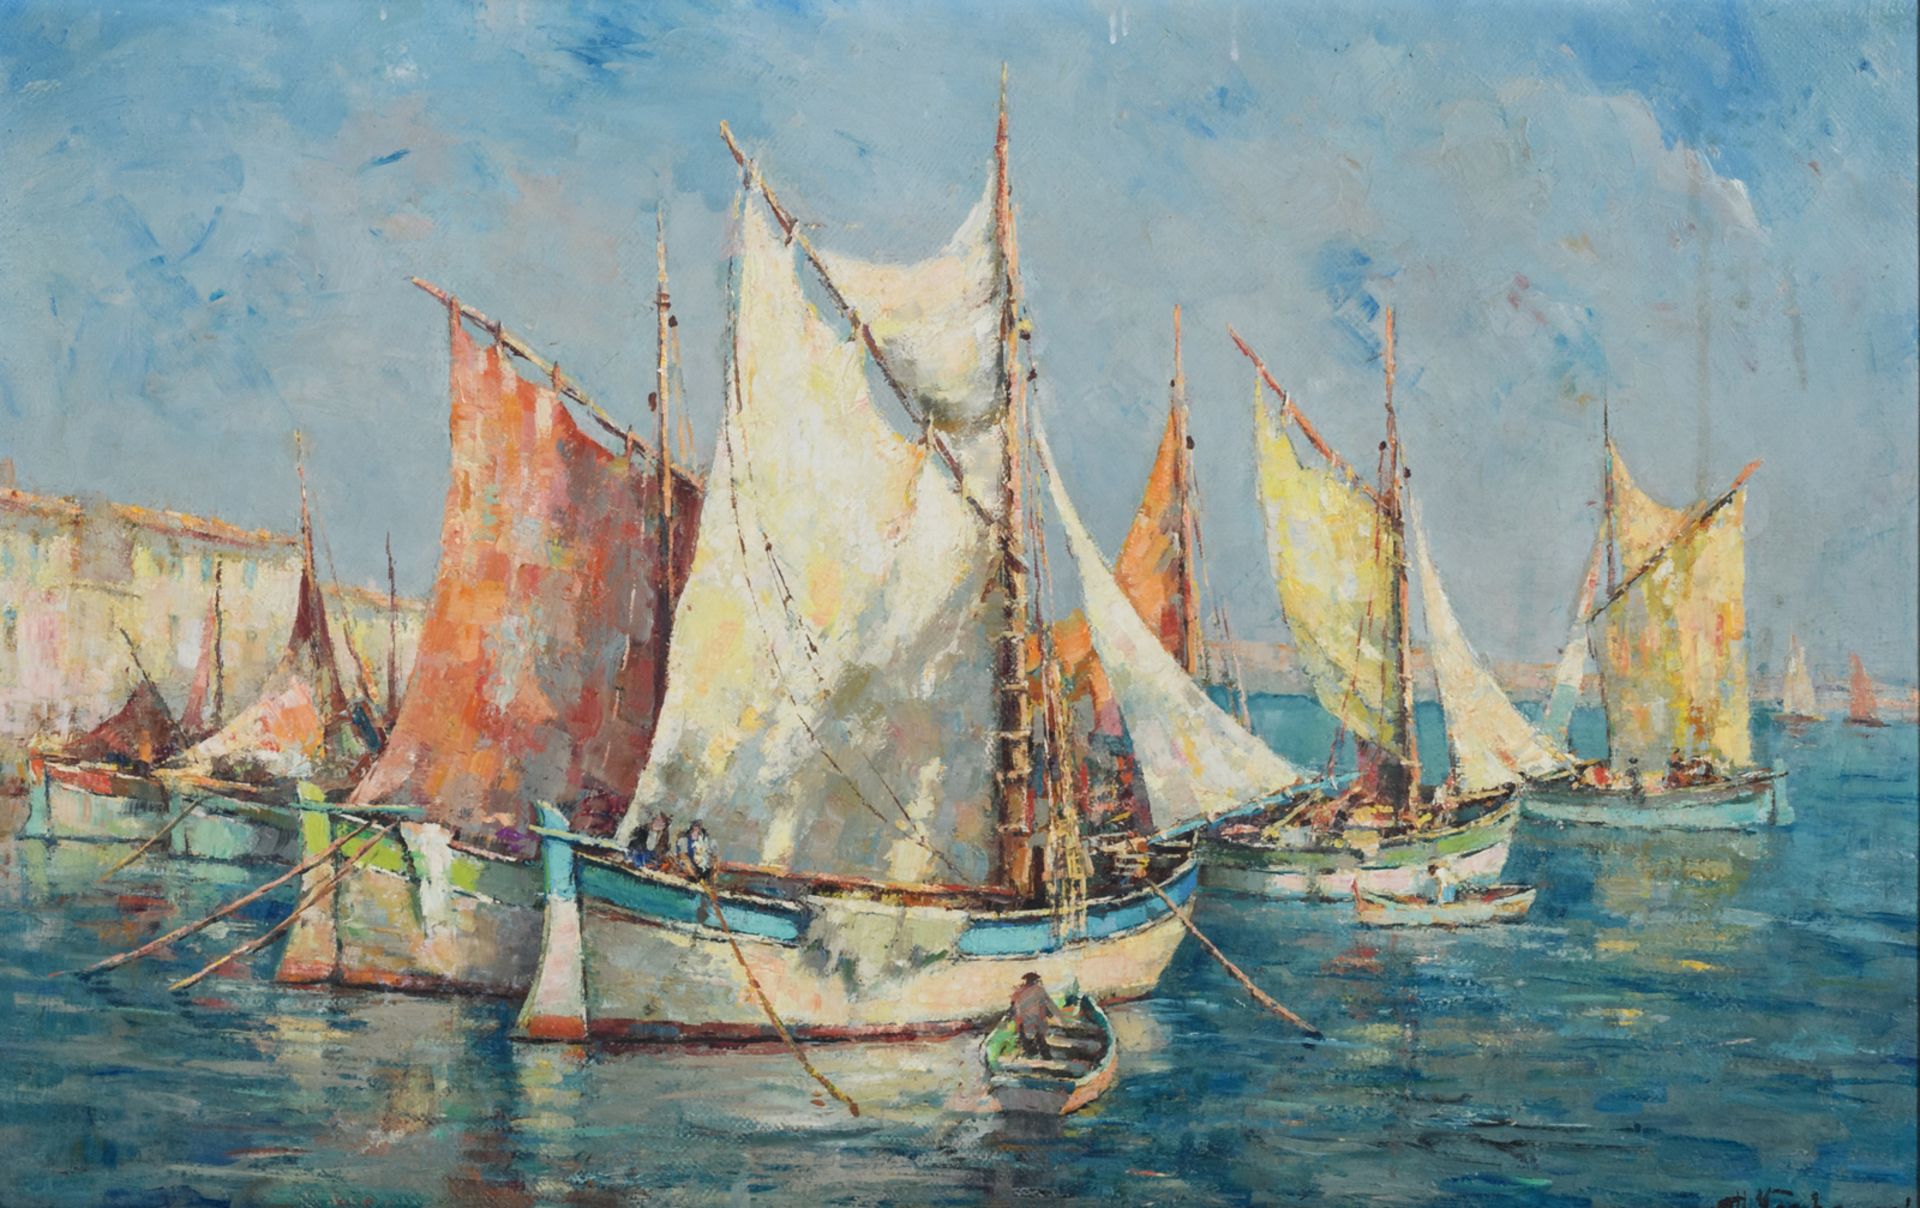 Verbrugghe Ch., a view on the port, oil on canvas, 60 x 92 cm